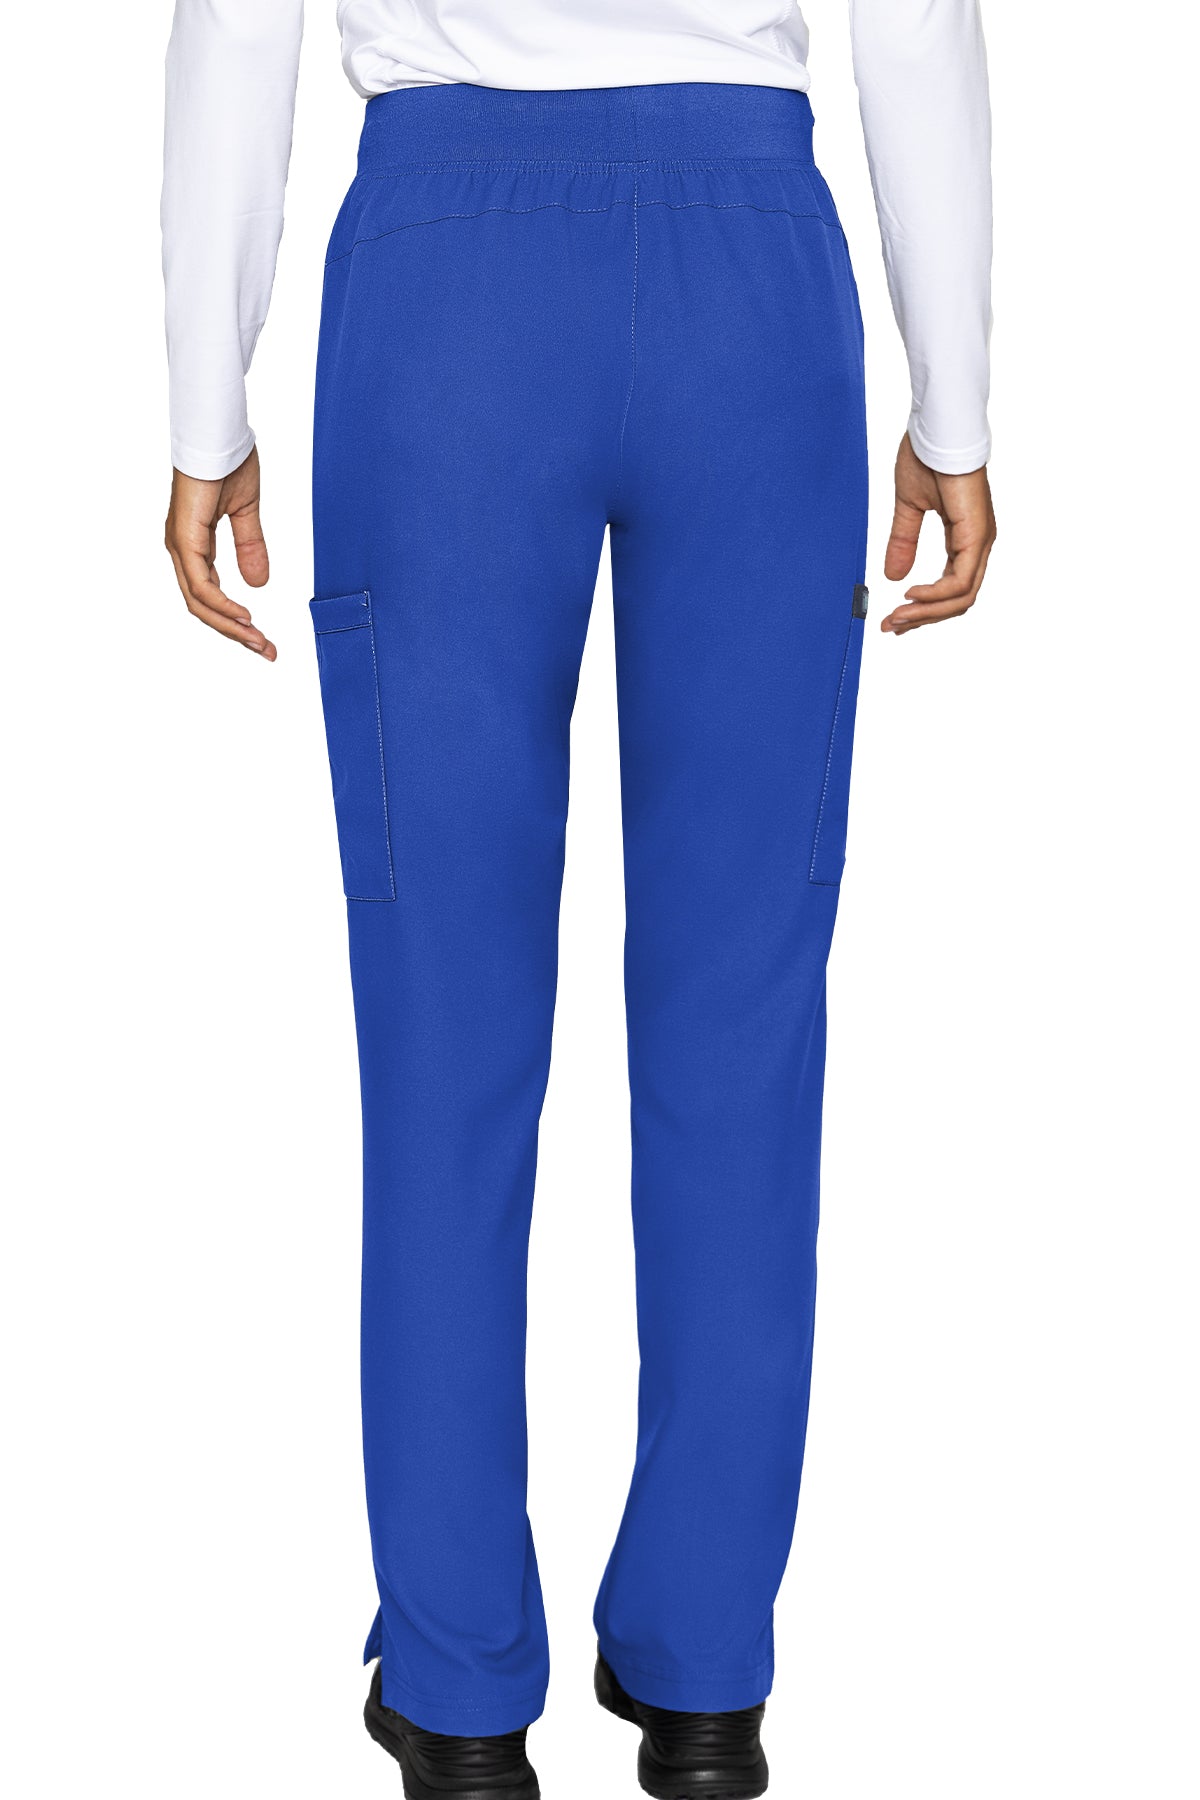 Med Couture 2702 Insight Women's Zipper Pocket Pant royal back